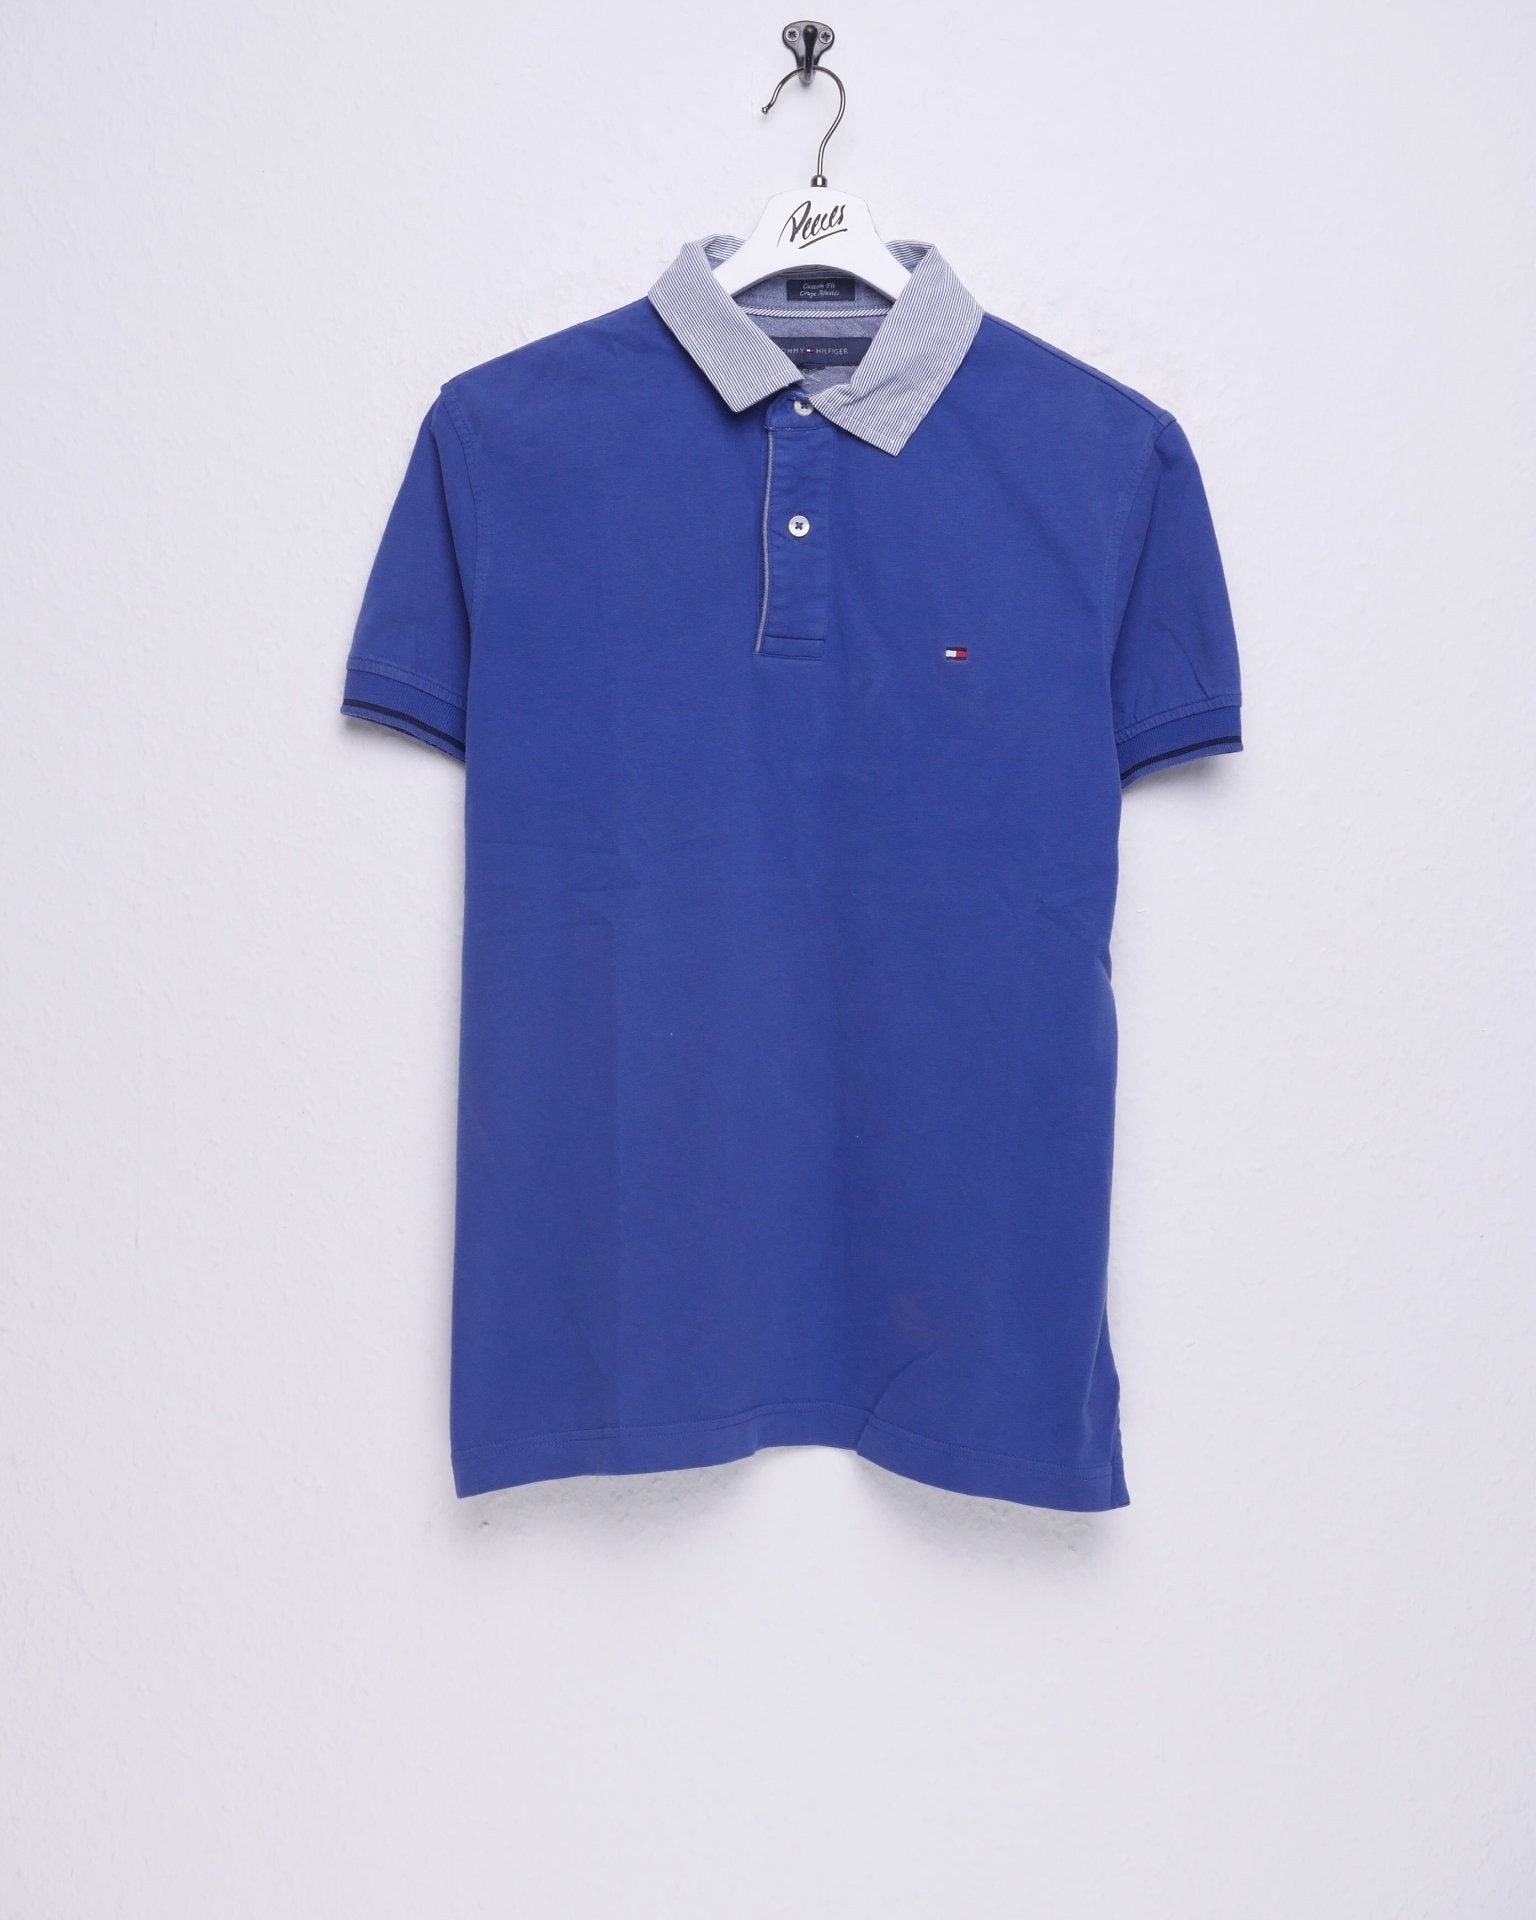 Tommy Hilfiger embroidered Logo blue S/S Polo Shirt - Peeces